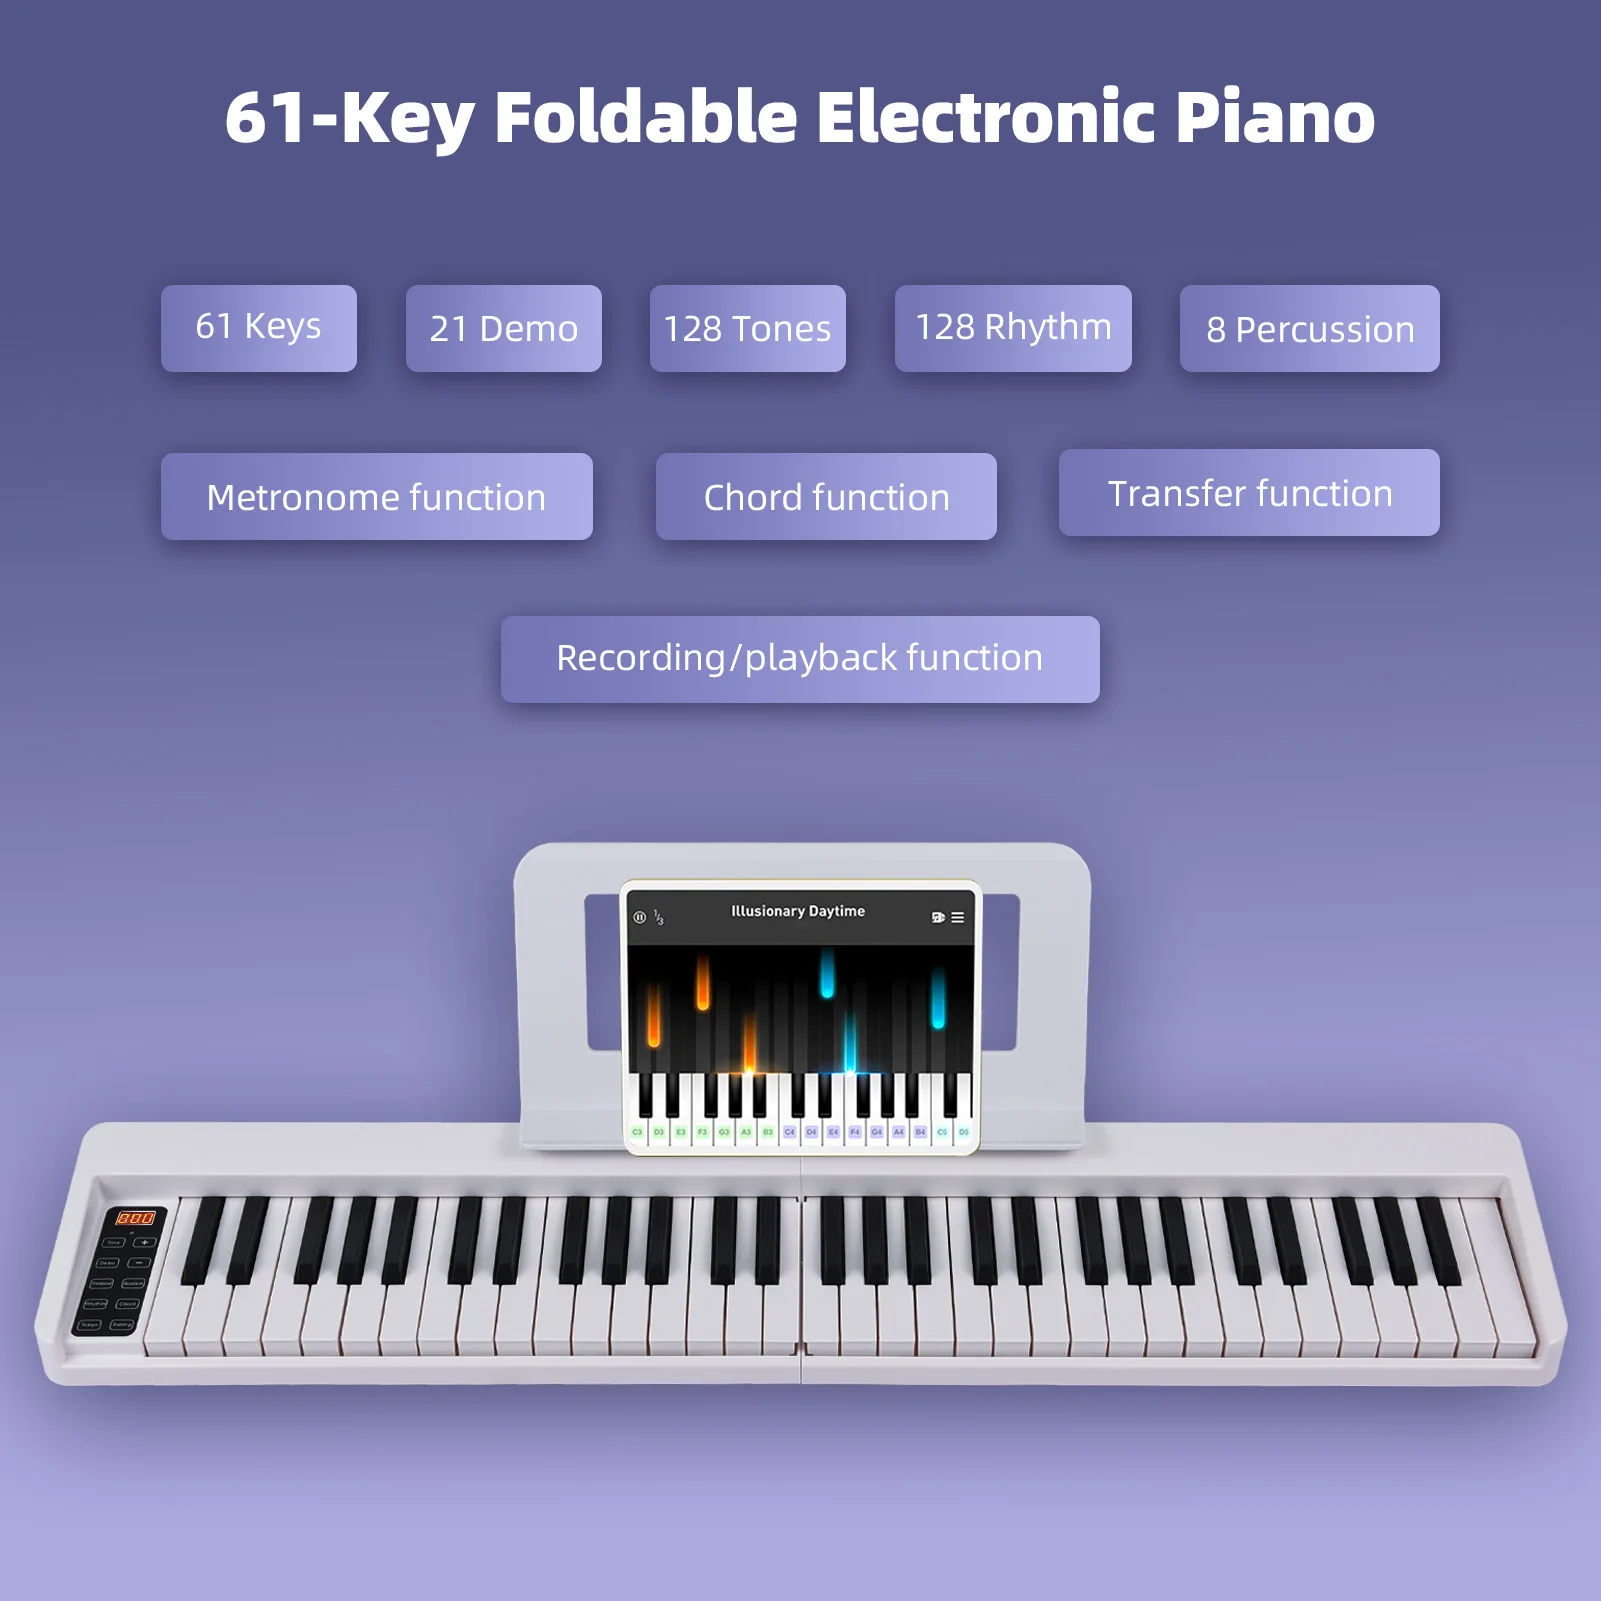 

61-Key Foldable Electronic Piano Multifunctional Electronic Organ with LCD Display BT Connectivity Portable Musical Instrument